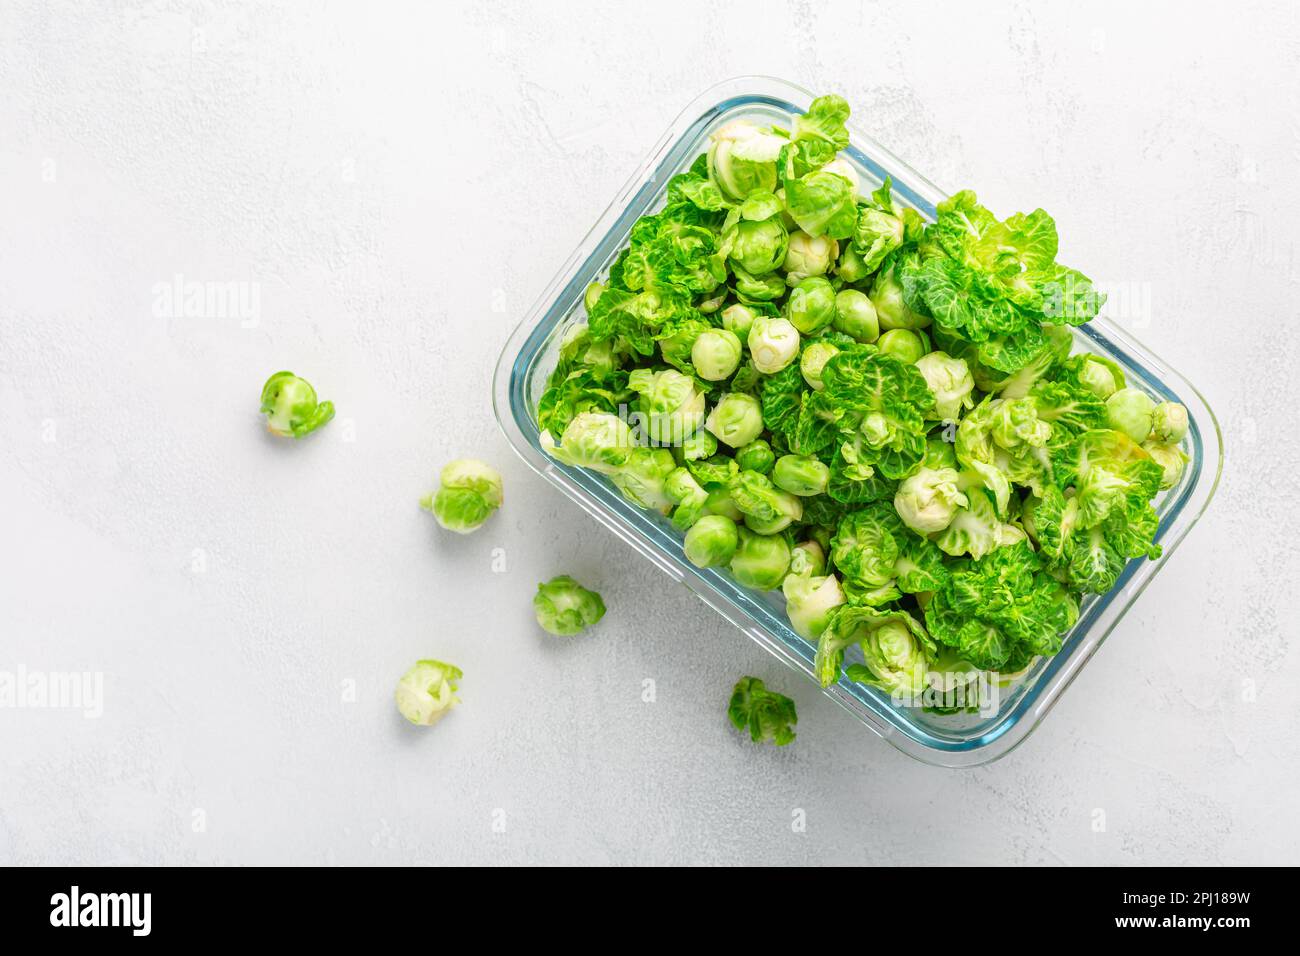 Fresh  organic green brussels sprouts and small winter cabbage vegetable in glass container, ready to freeze Stock Photo